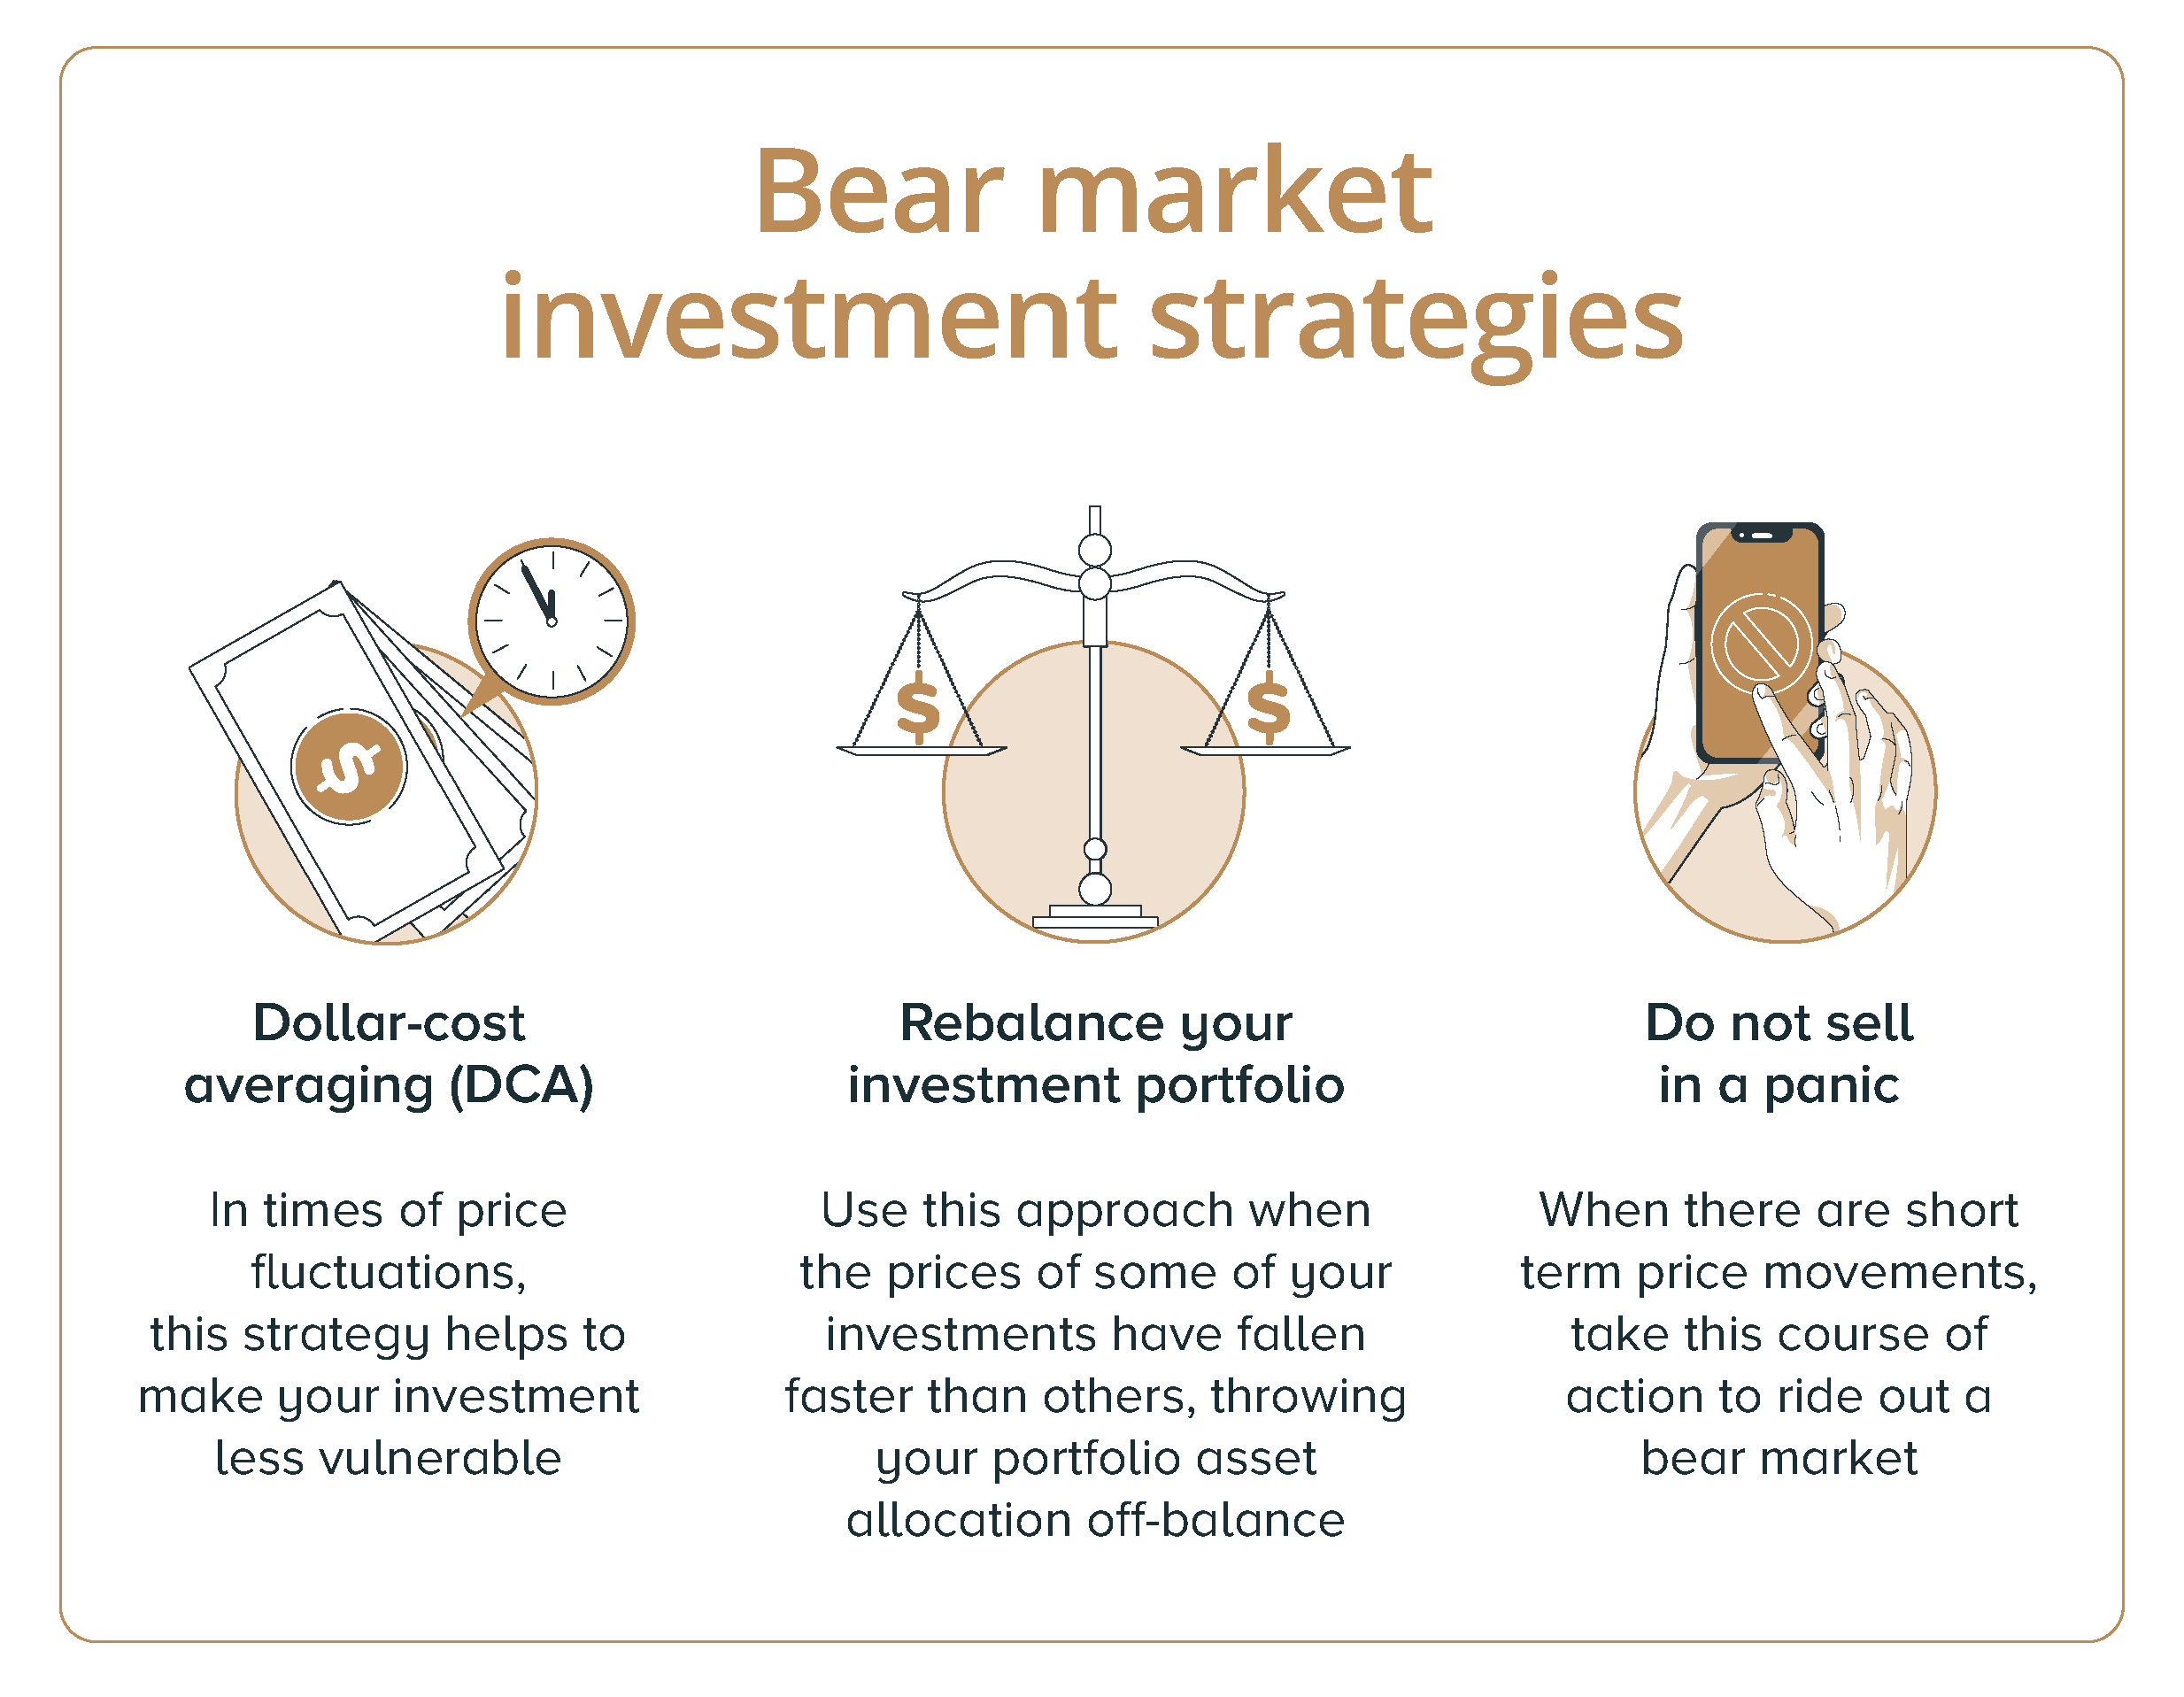 Investment strategies for a bear market